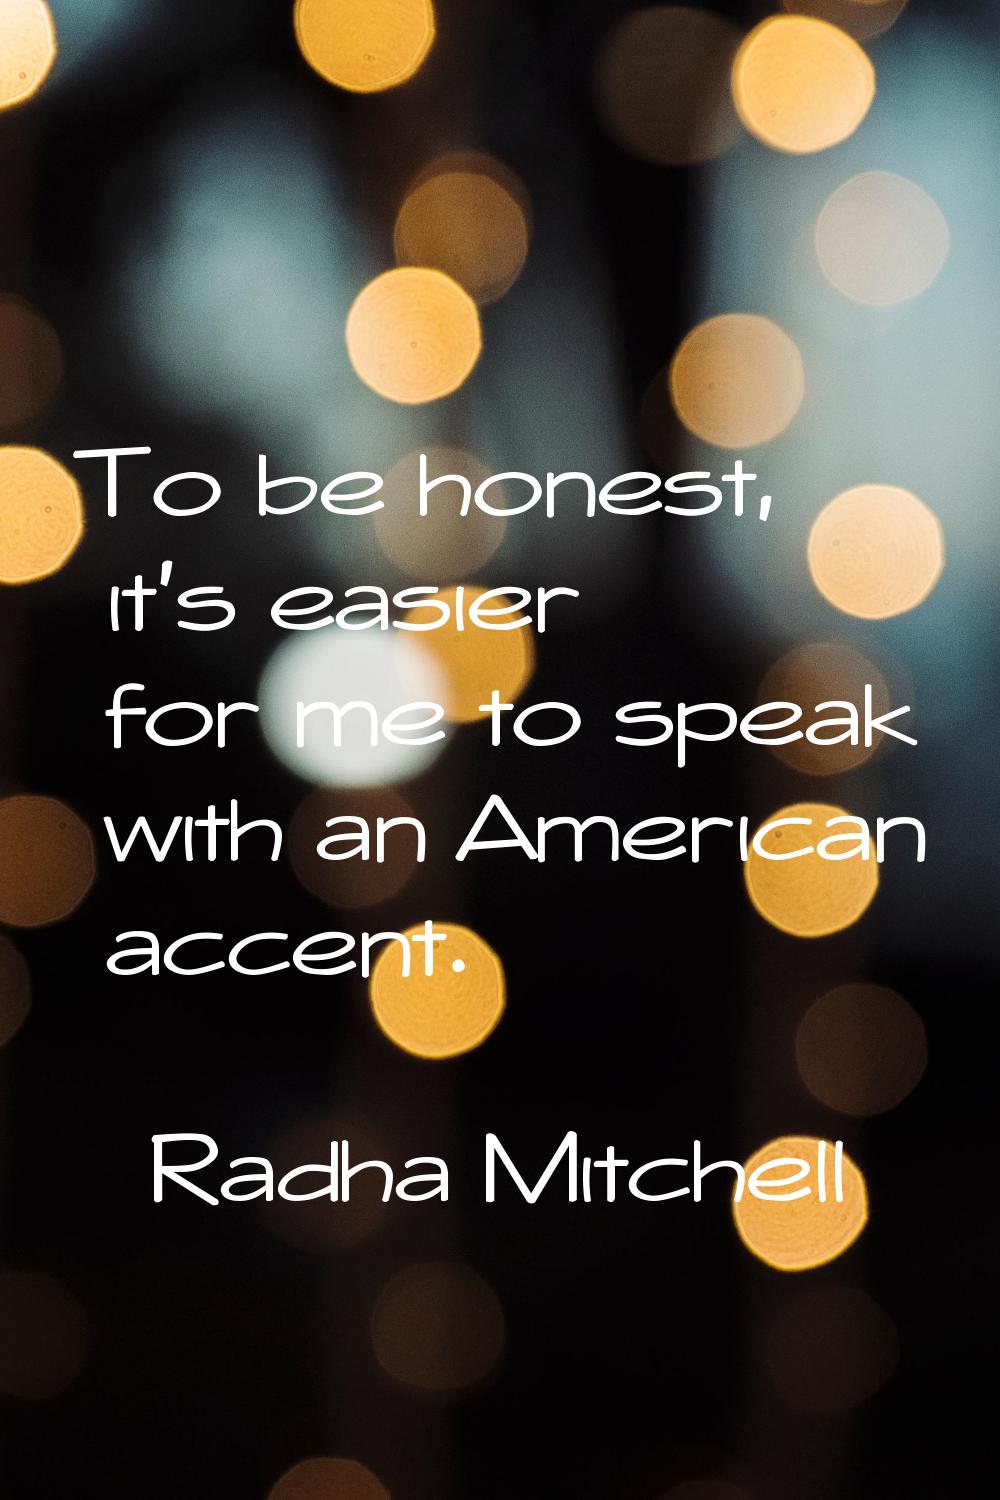 To be honest, it's easier for me to speak with an American accent.